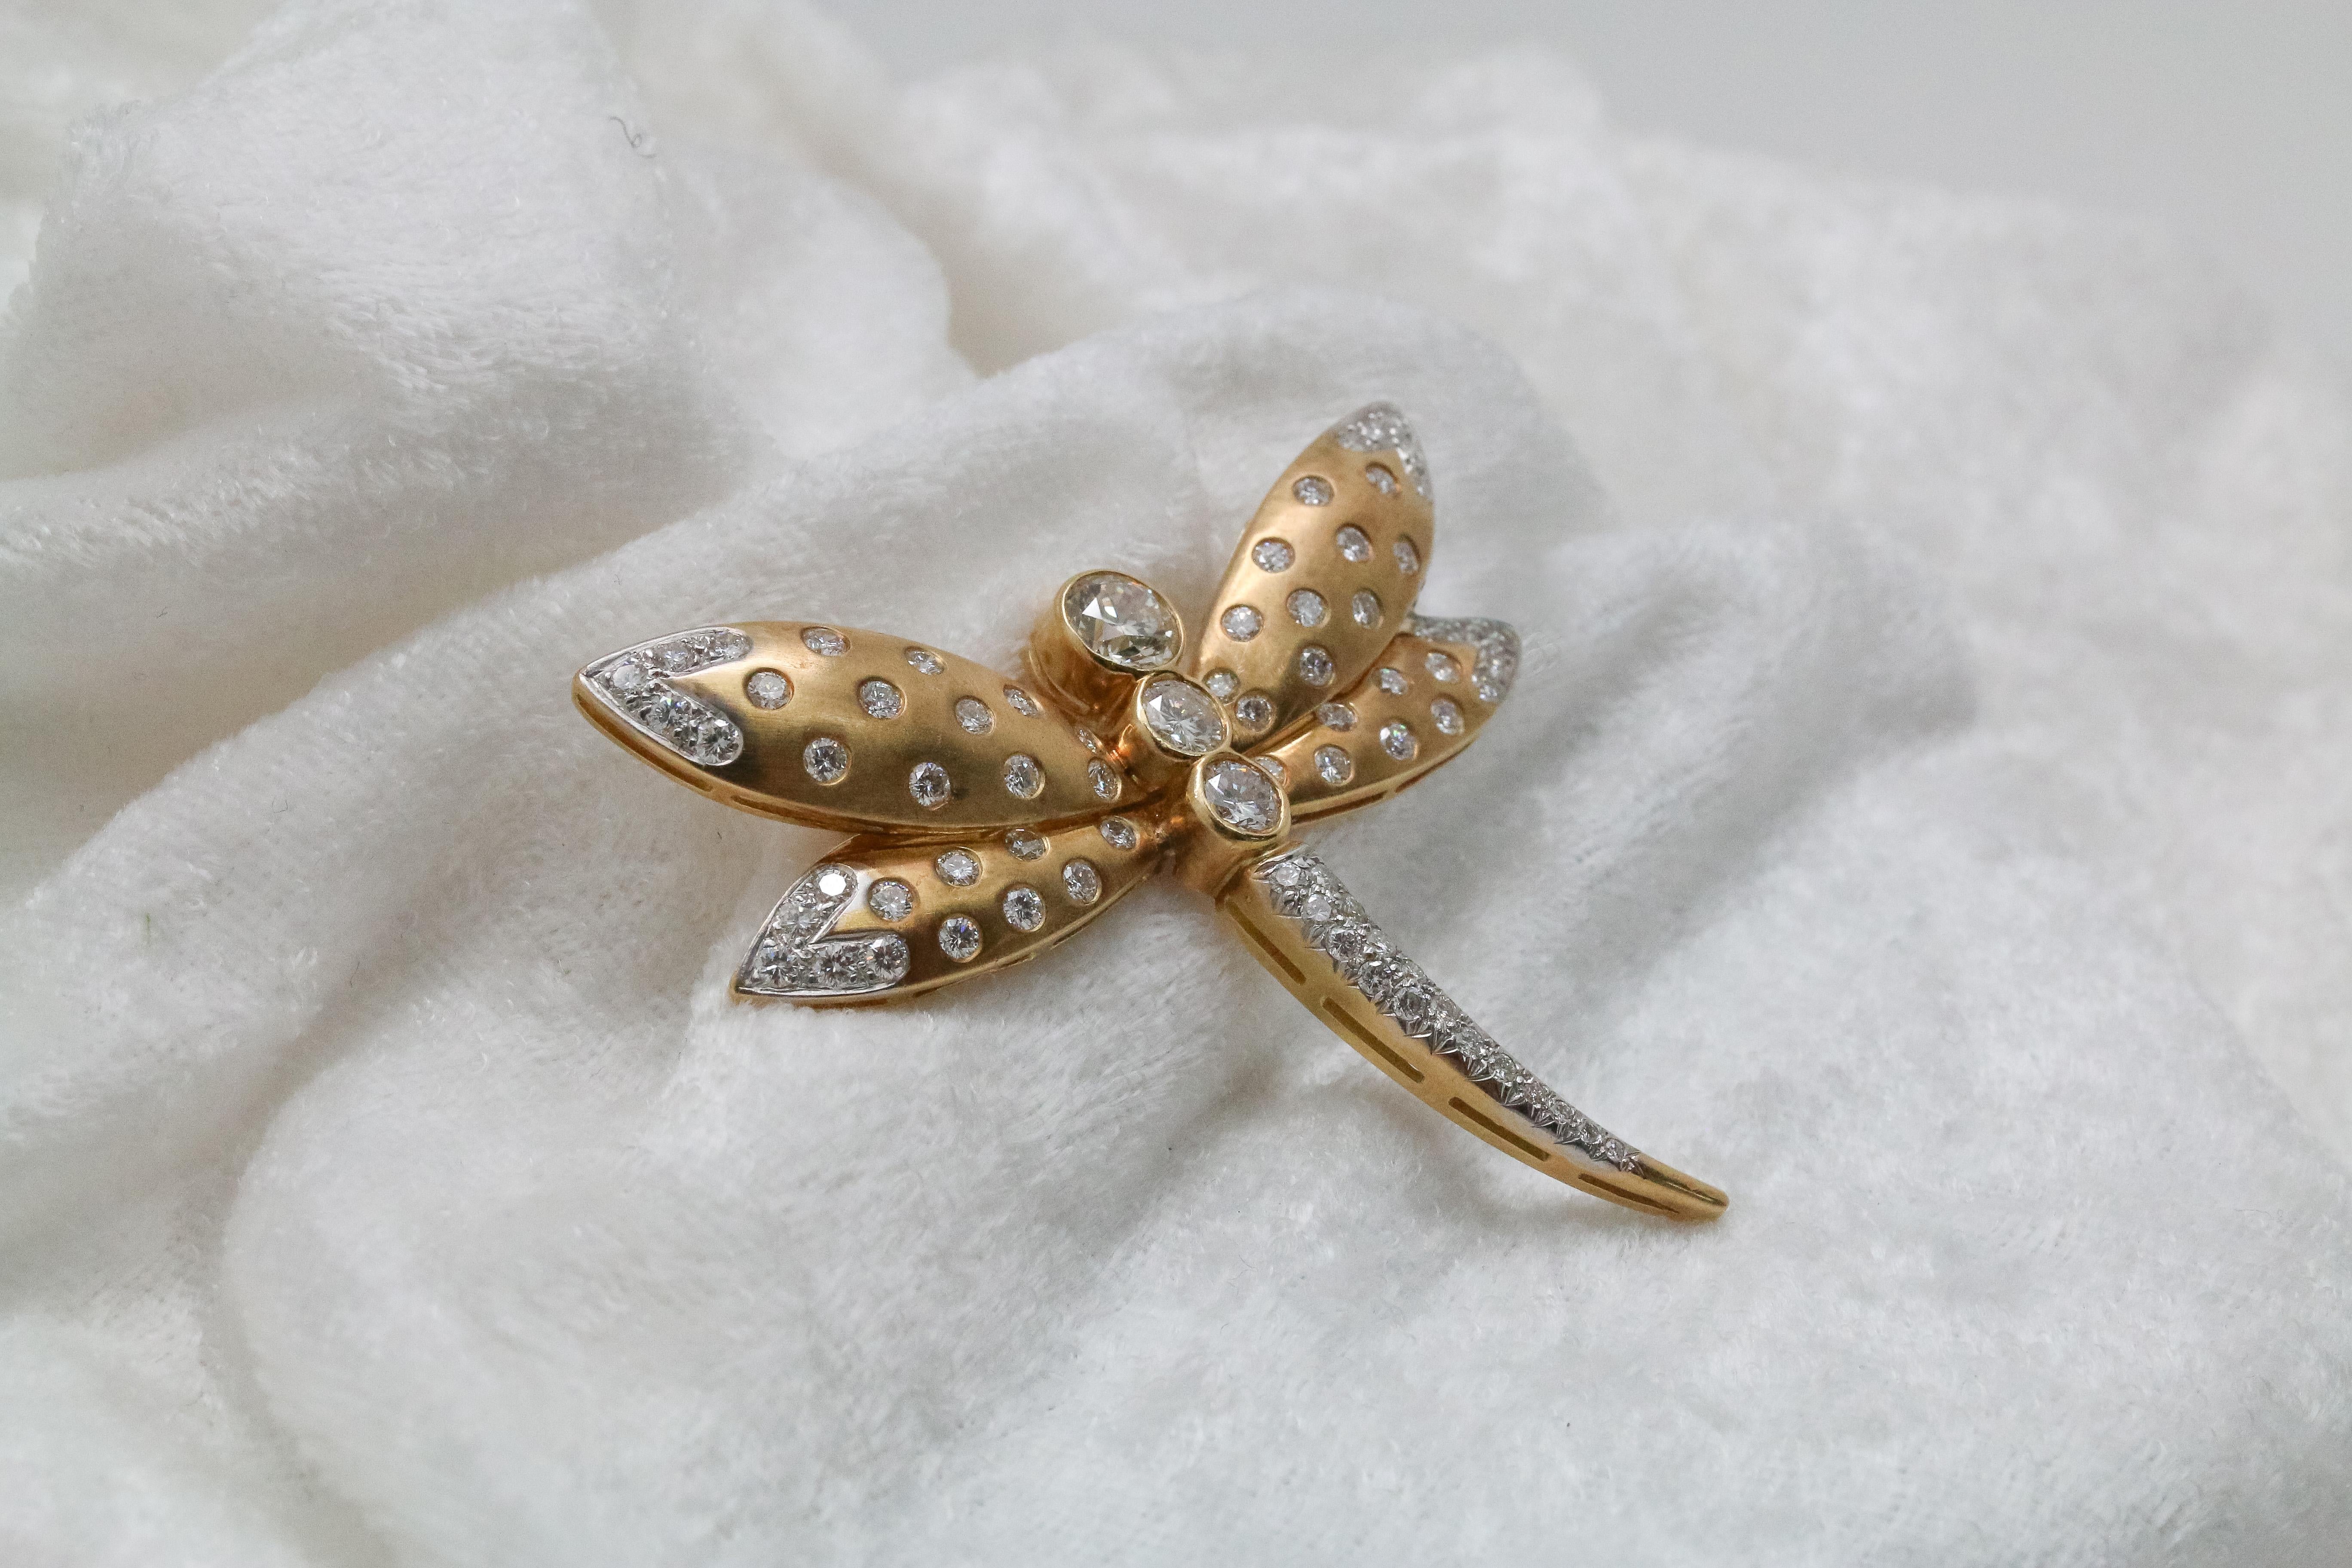 Showcasing this impressive and unique butterfly brooch that has been masterfully handcrafted and designed with 1.25 carats of Round Diamonds. A wonderful contrast of bezel set stones brings this lovely creature alive. Beautifully set in 18 karat